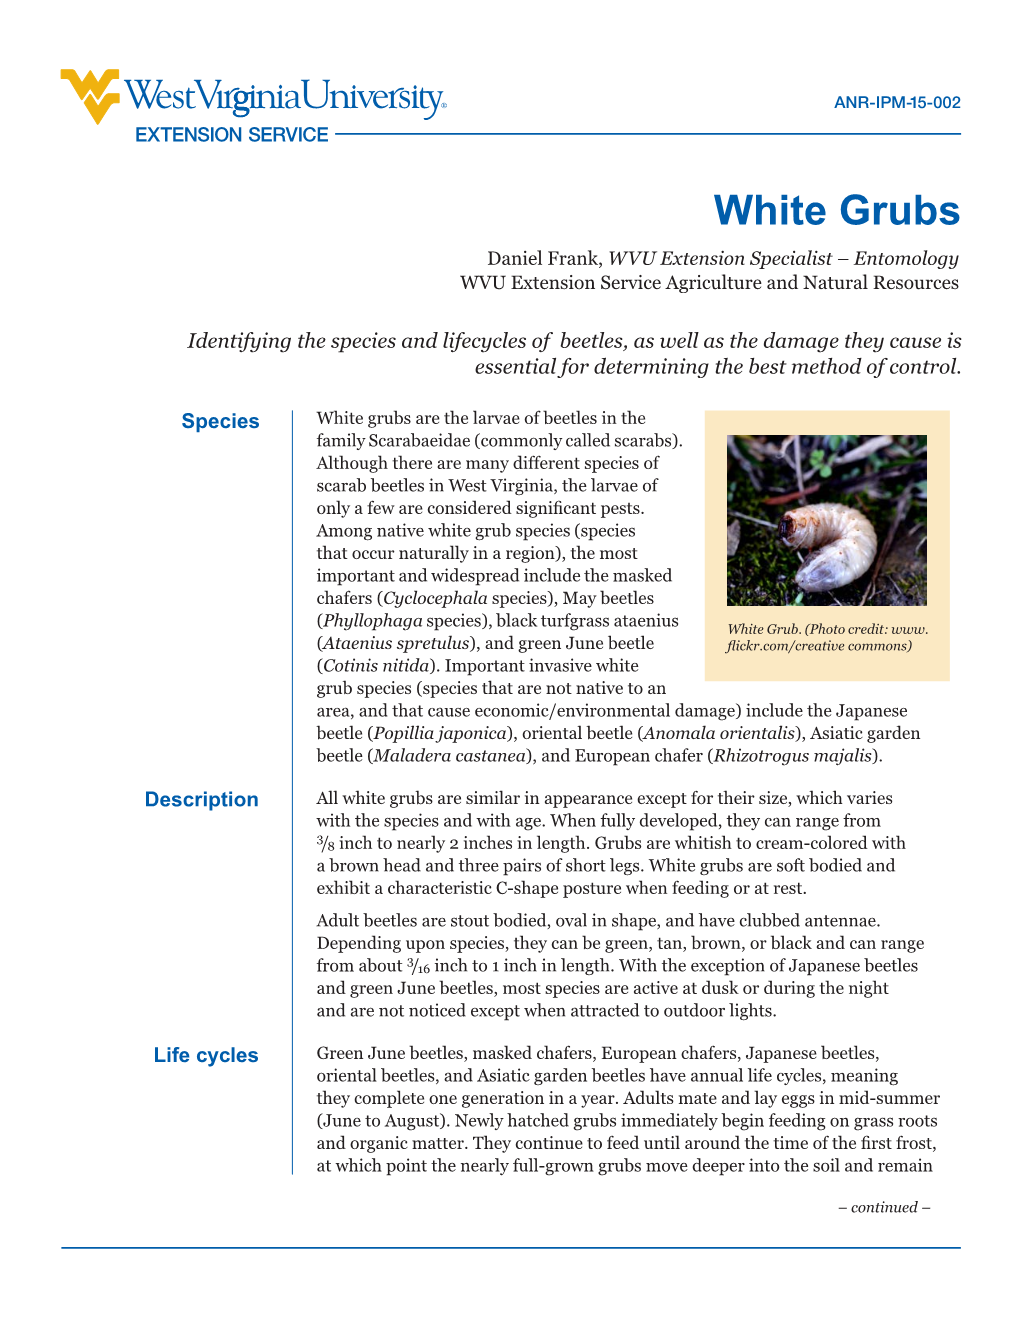 White Grubs Daniel Frank, WVU Extension Specialist – Entomology WVU Extension Service Agriculture and Natural Resources